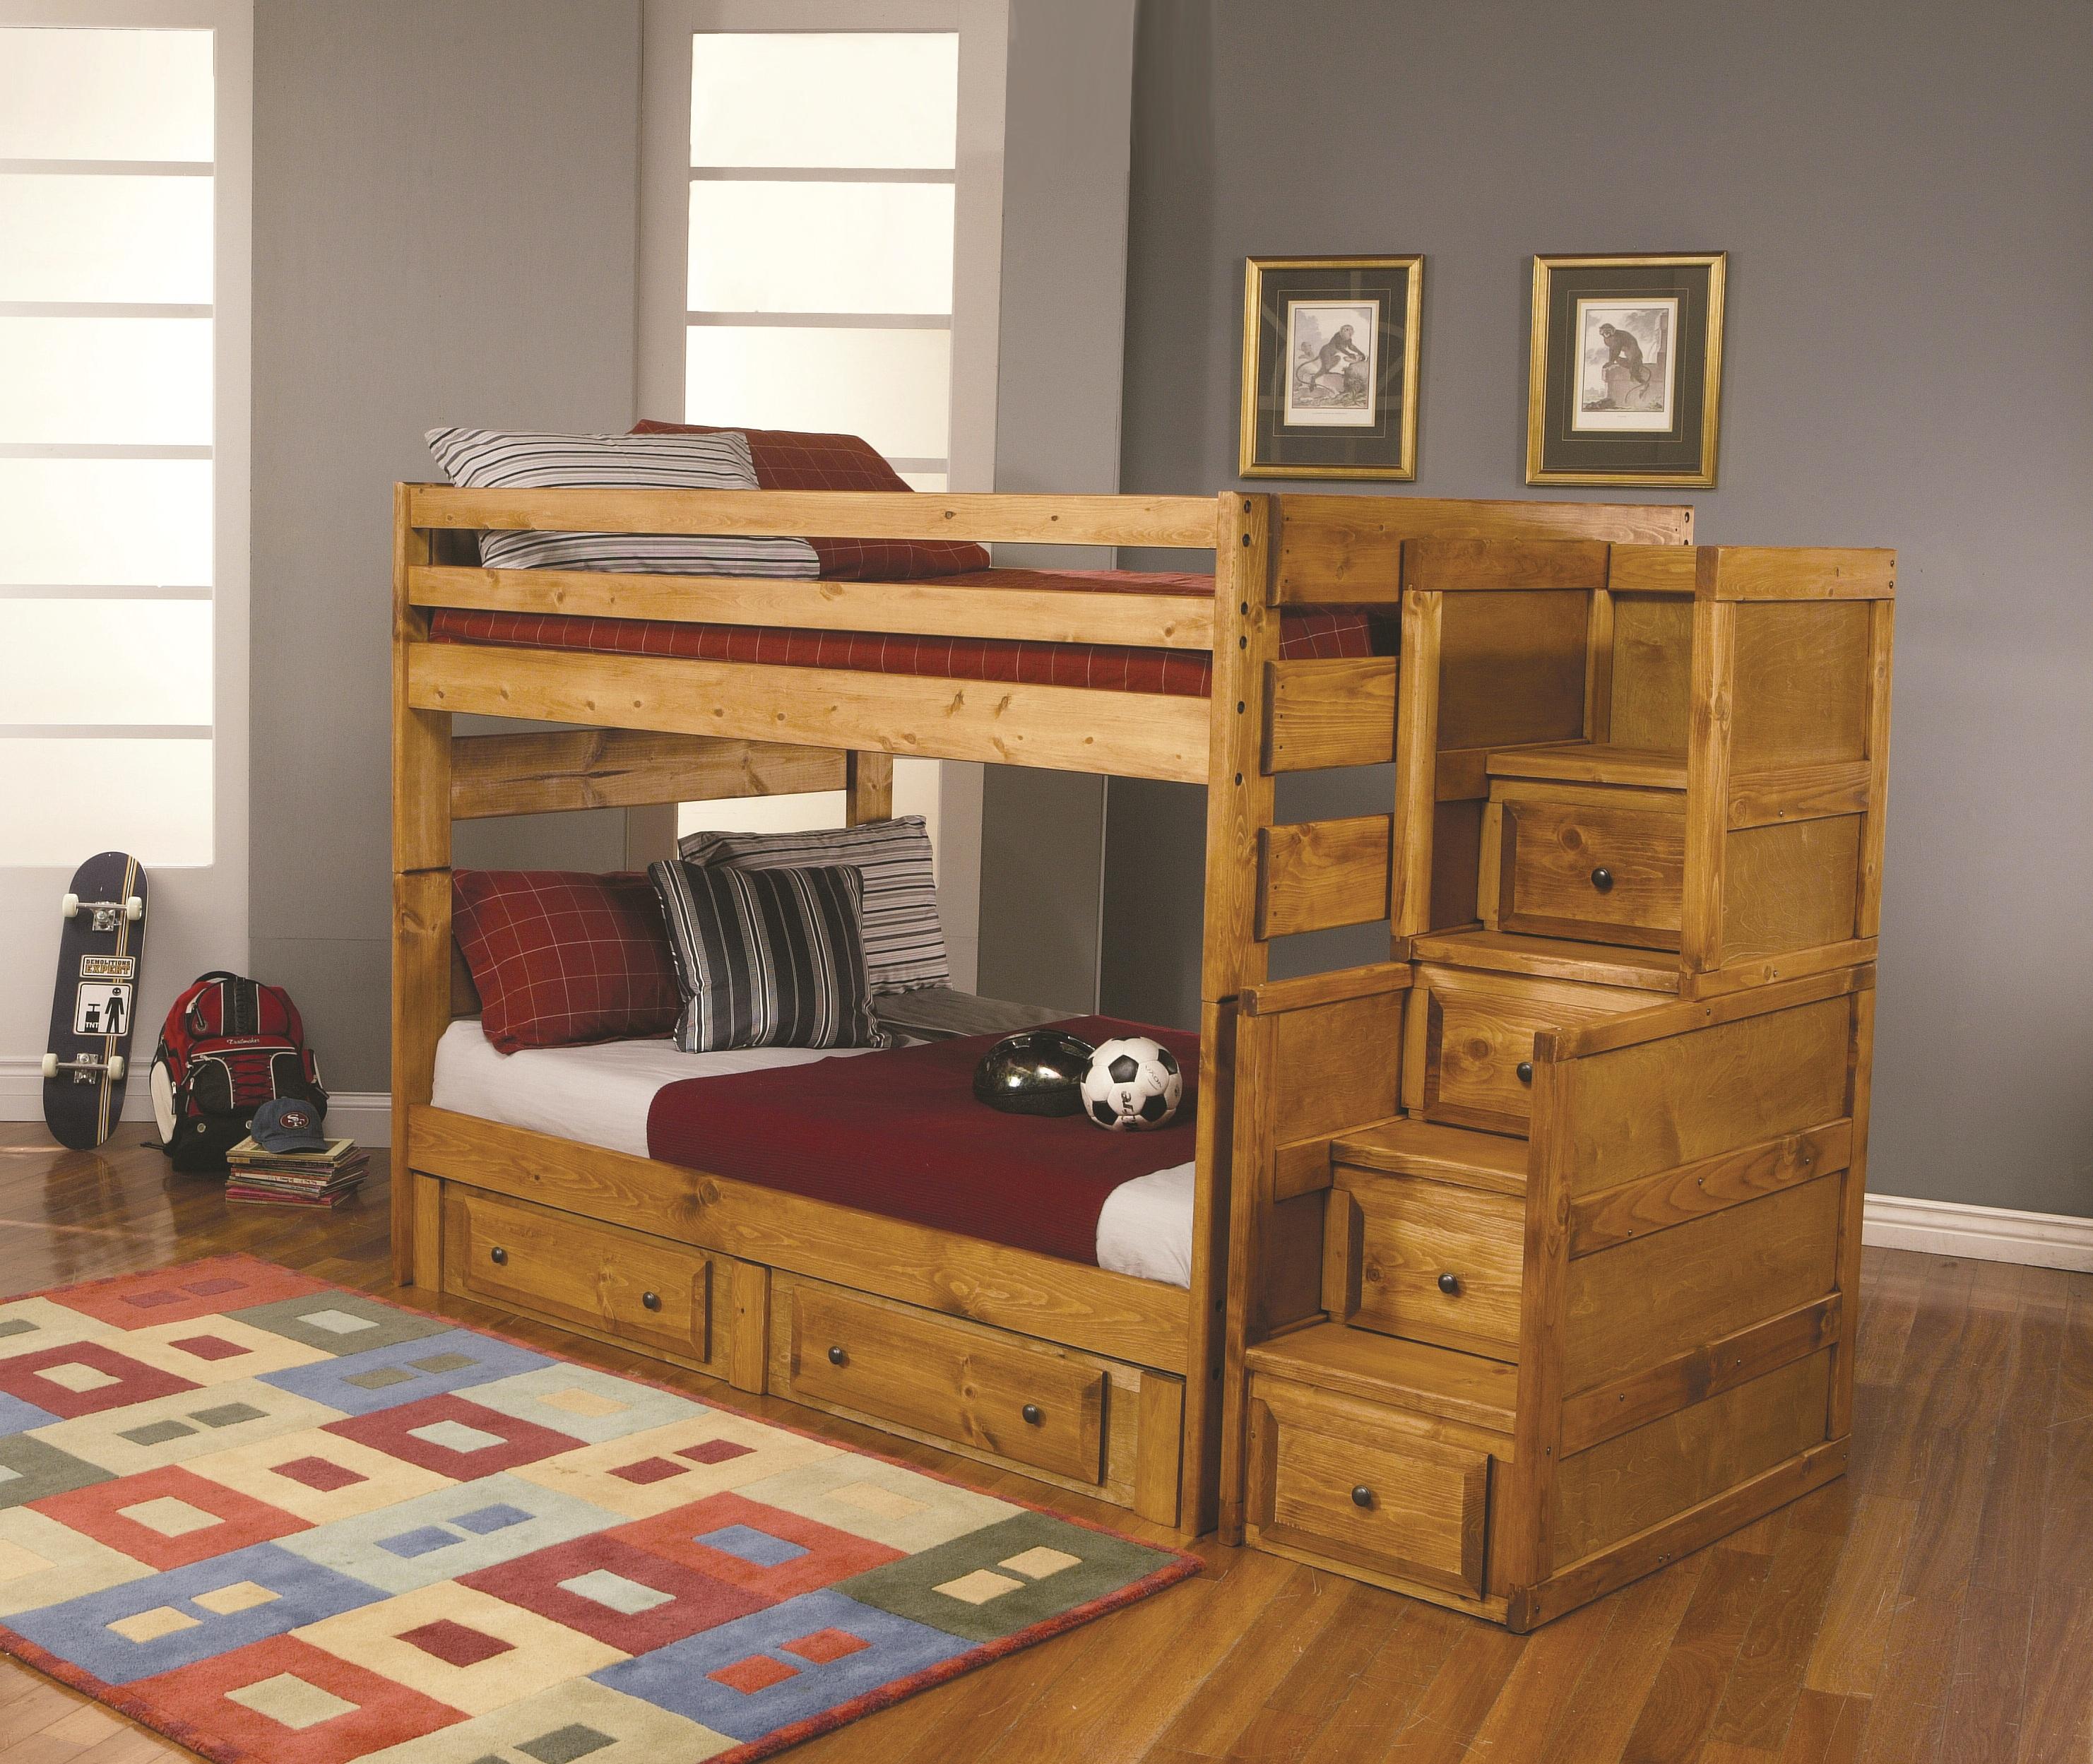 awesome-space-saving-beds-for-adults-with-wooden-bunk-beds-and-storage-at-stairs-bunk-bed-bedroom-picture-space-saving-beds-ideas